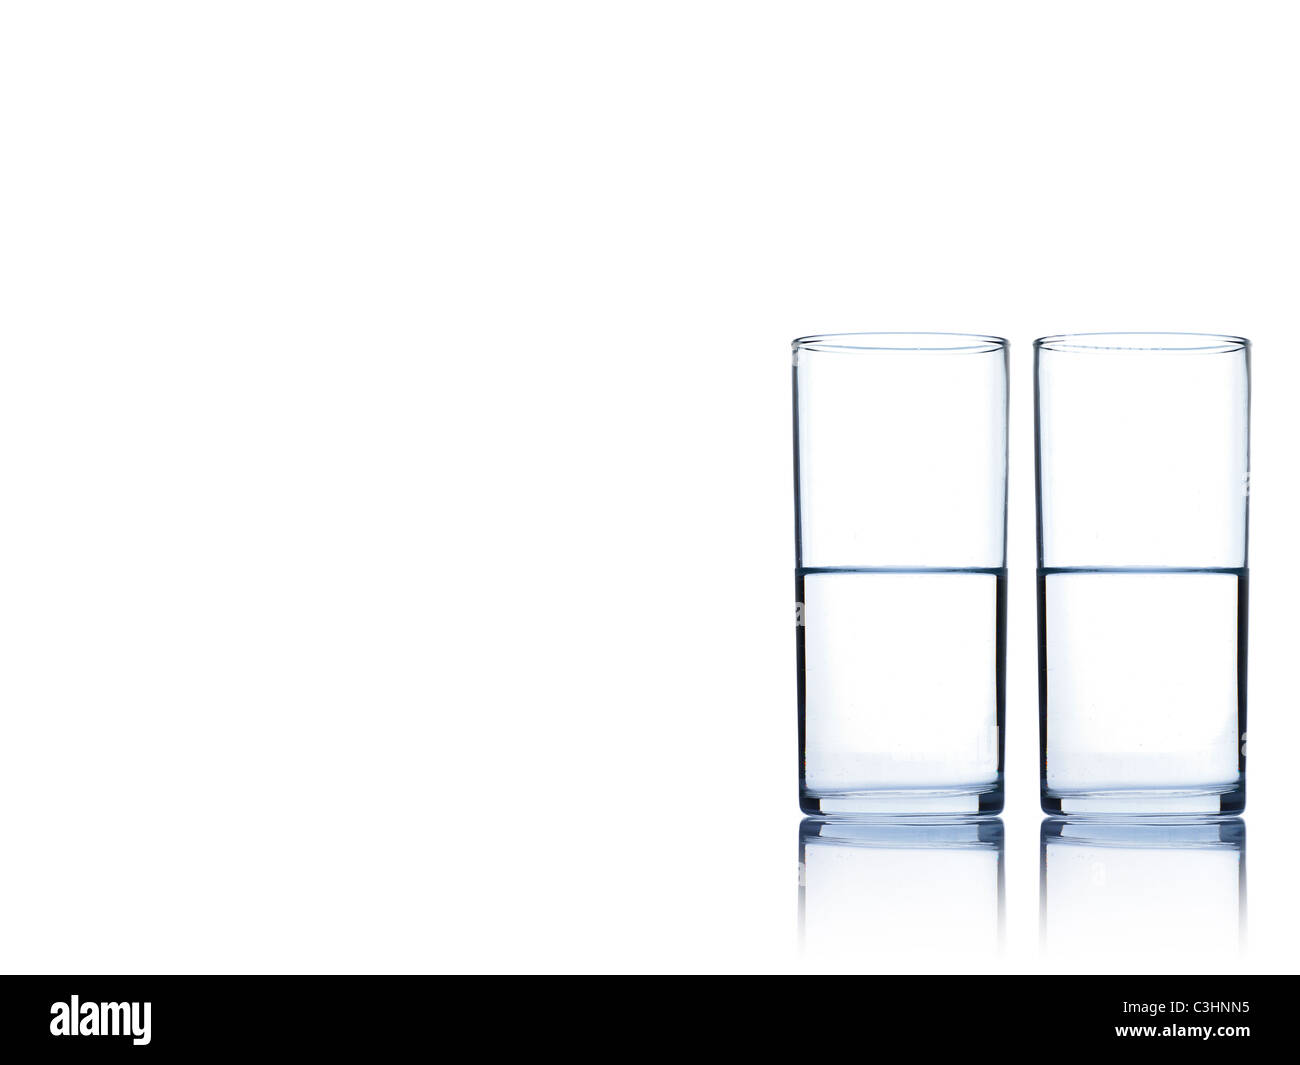 Studio shot of two glasses of water Stock Photo